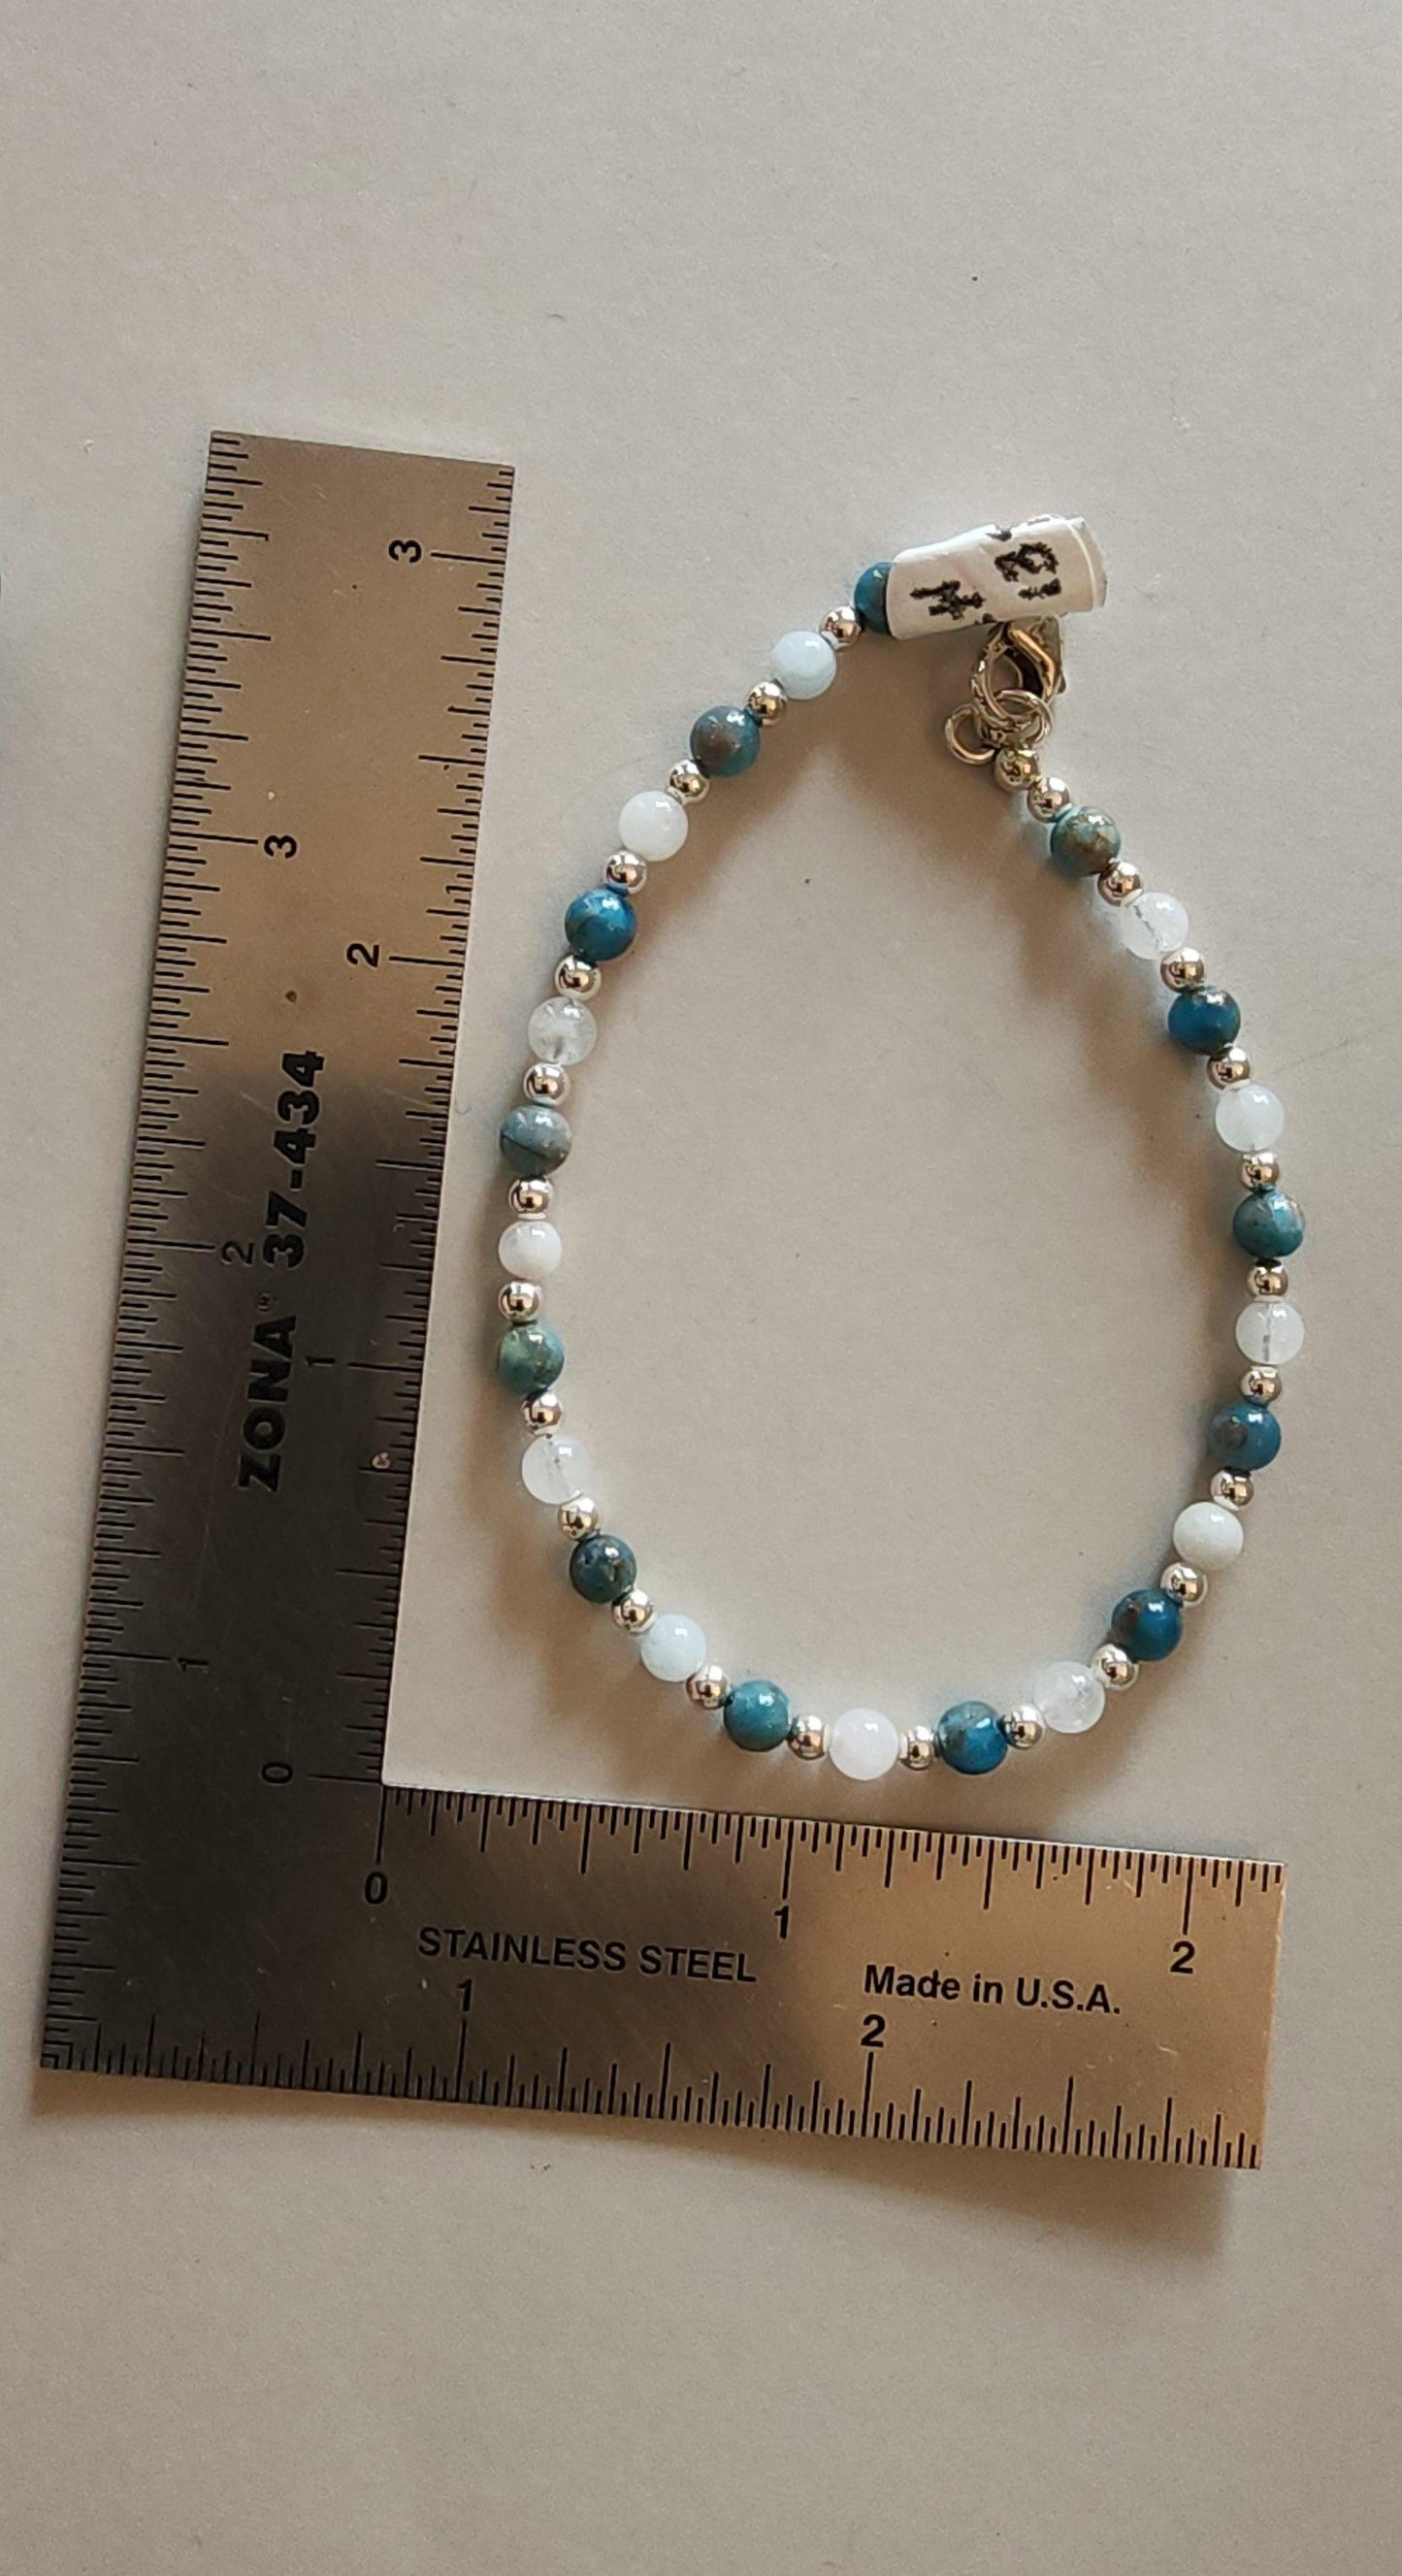 Handmade Womans Apatite, Aquamarine and Sterling Silver Beaded Bracelet - Gilded Heart Designs